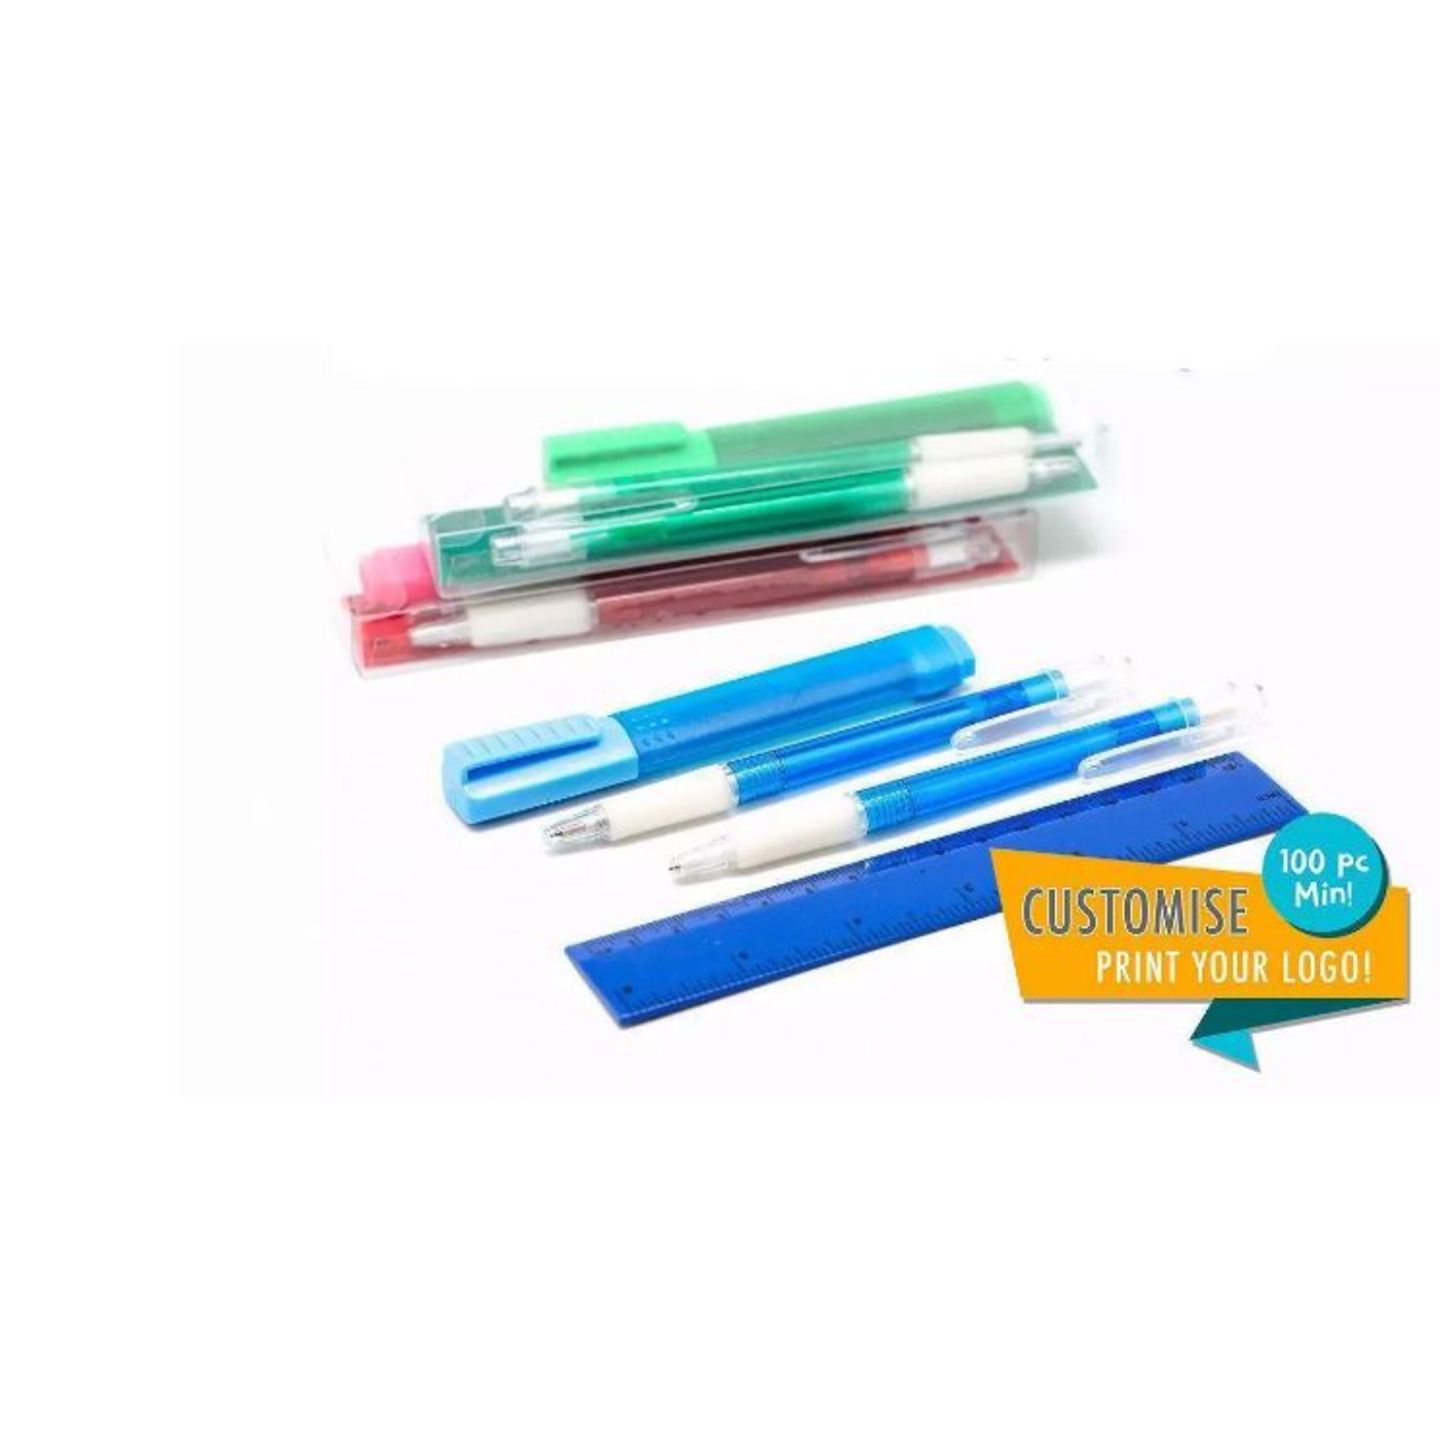 4-in-1 Stationery Set Colour Red, Green, Blue, Yellow